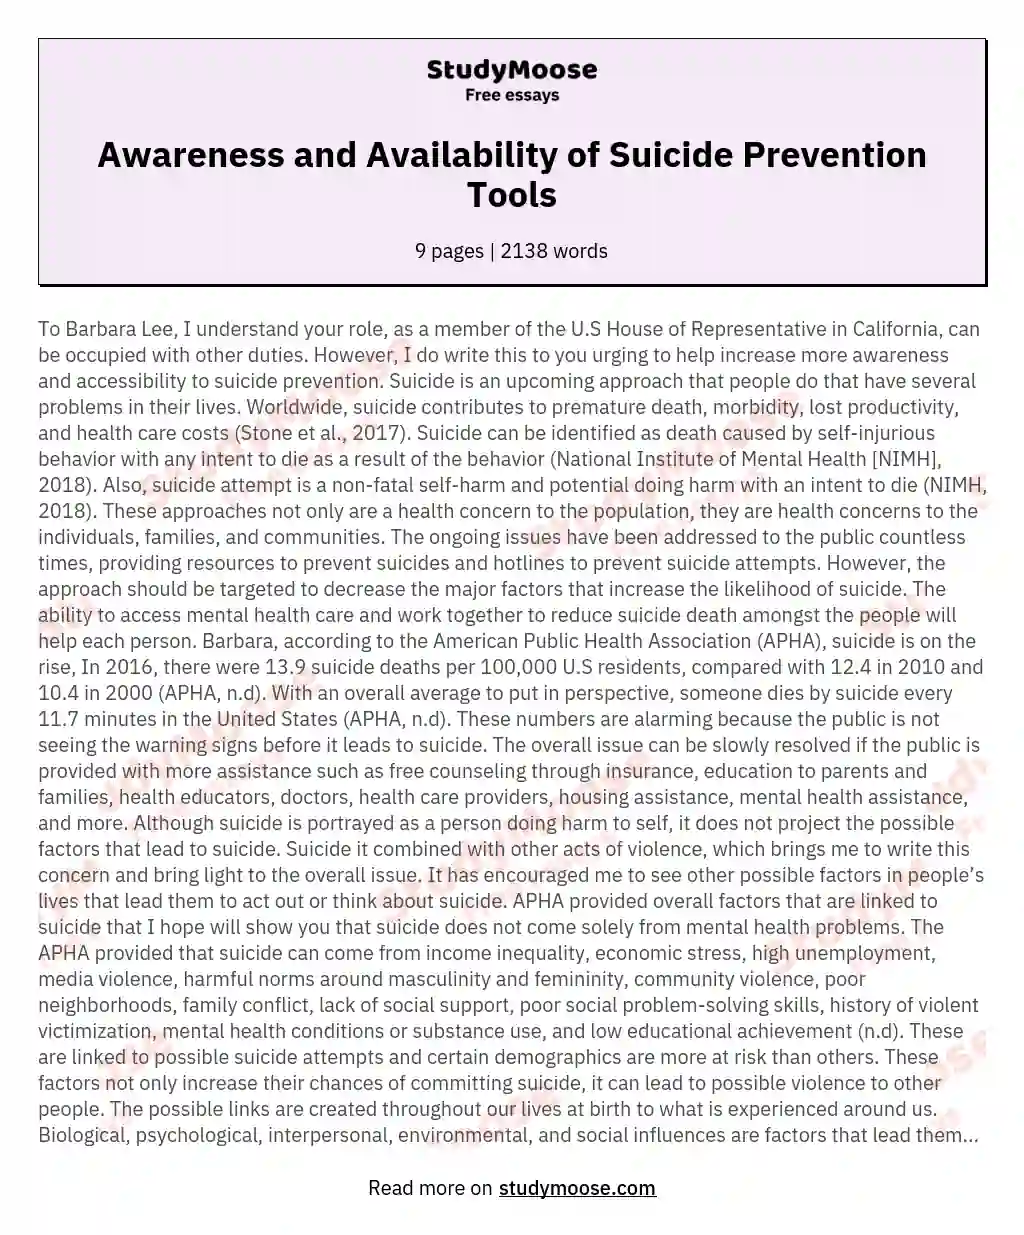 Awareness and Availability of Suicide Prevention Tools essay